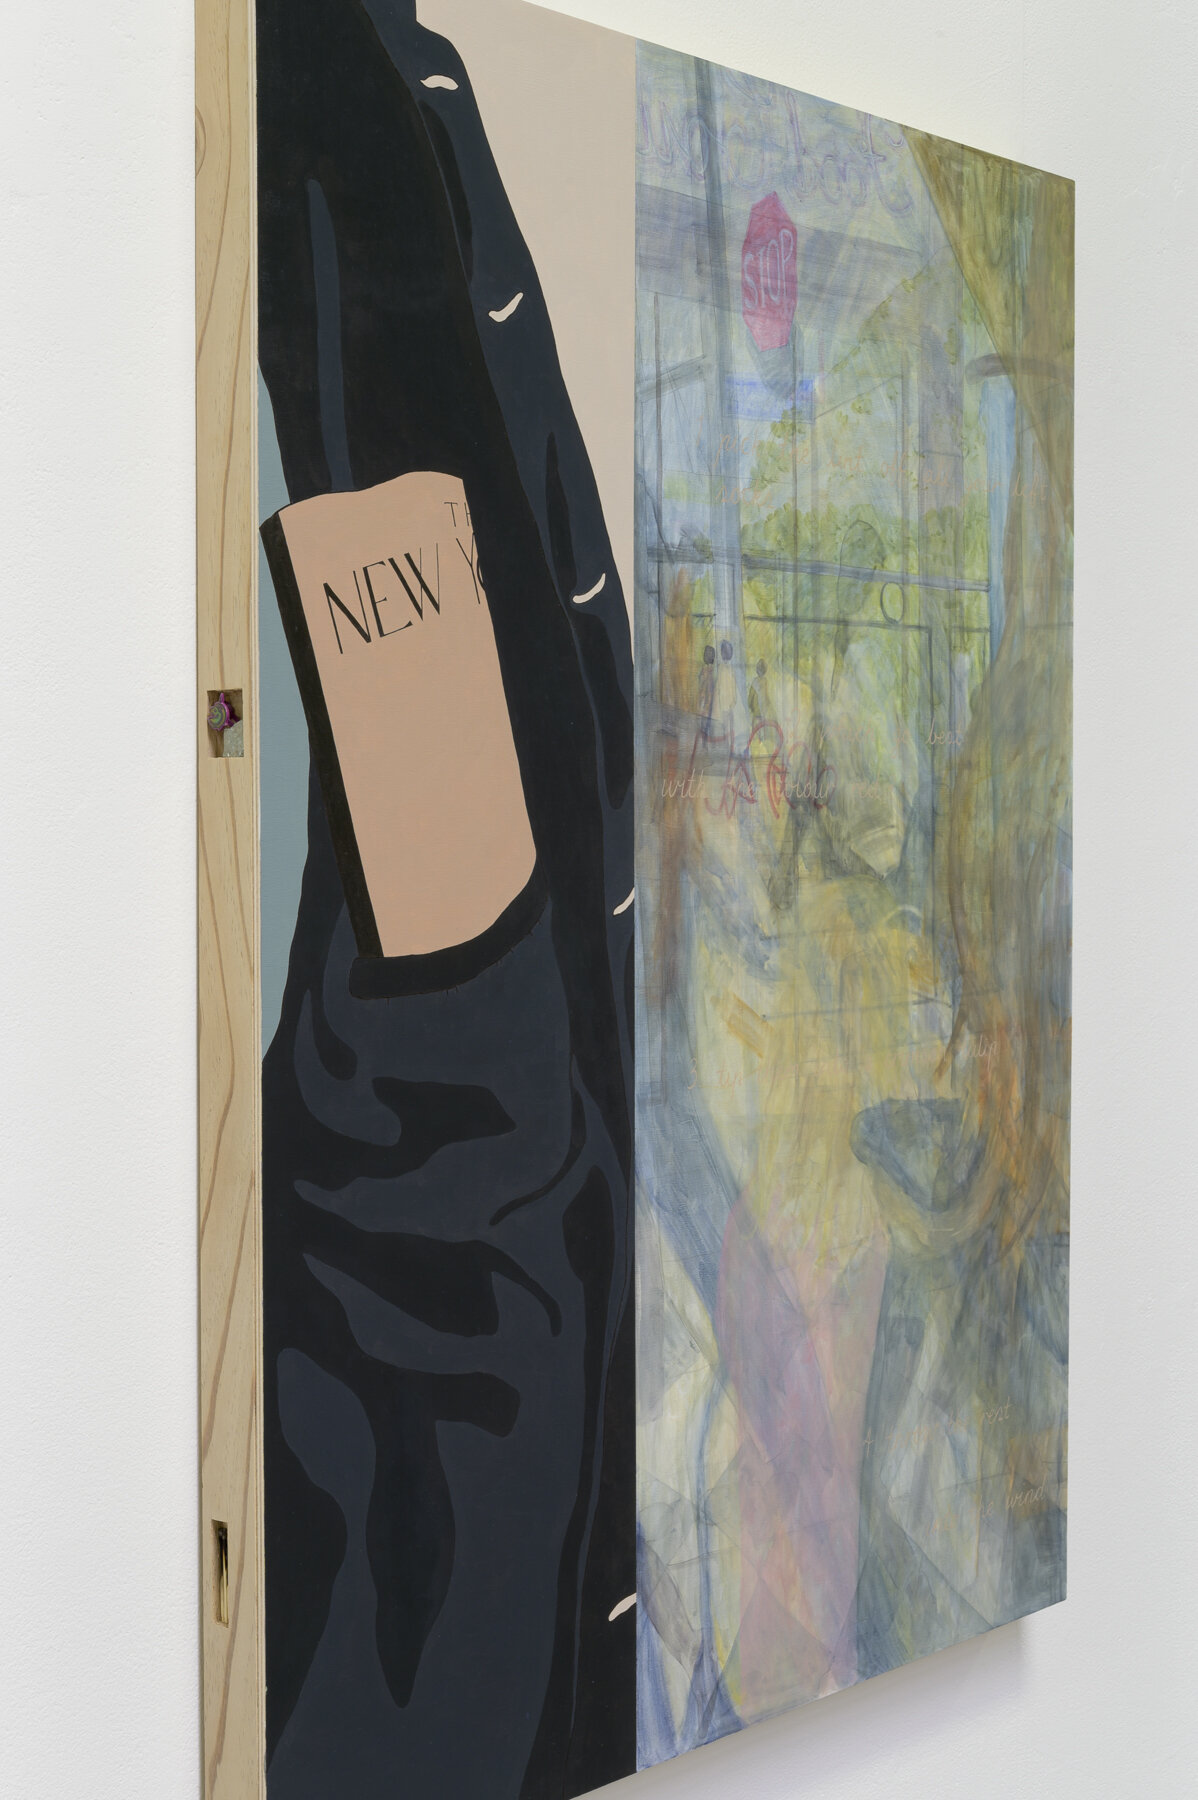   i only read the new yorker  (installation view)  2019. Oil paint and found objects on plywood board. 104 x 79 x 4.9.  Image courtesy of Aaron Christopher Rees. 